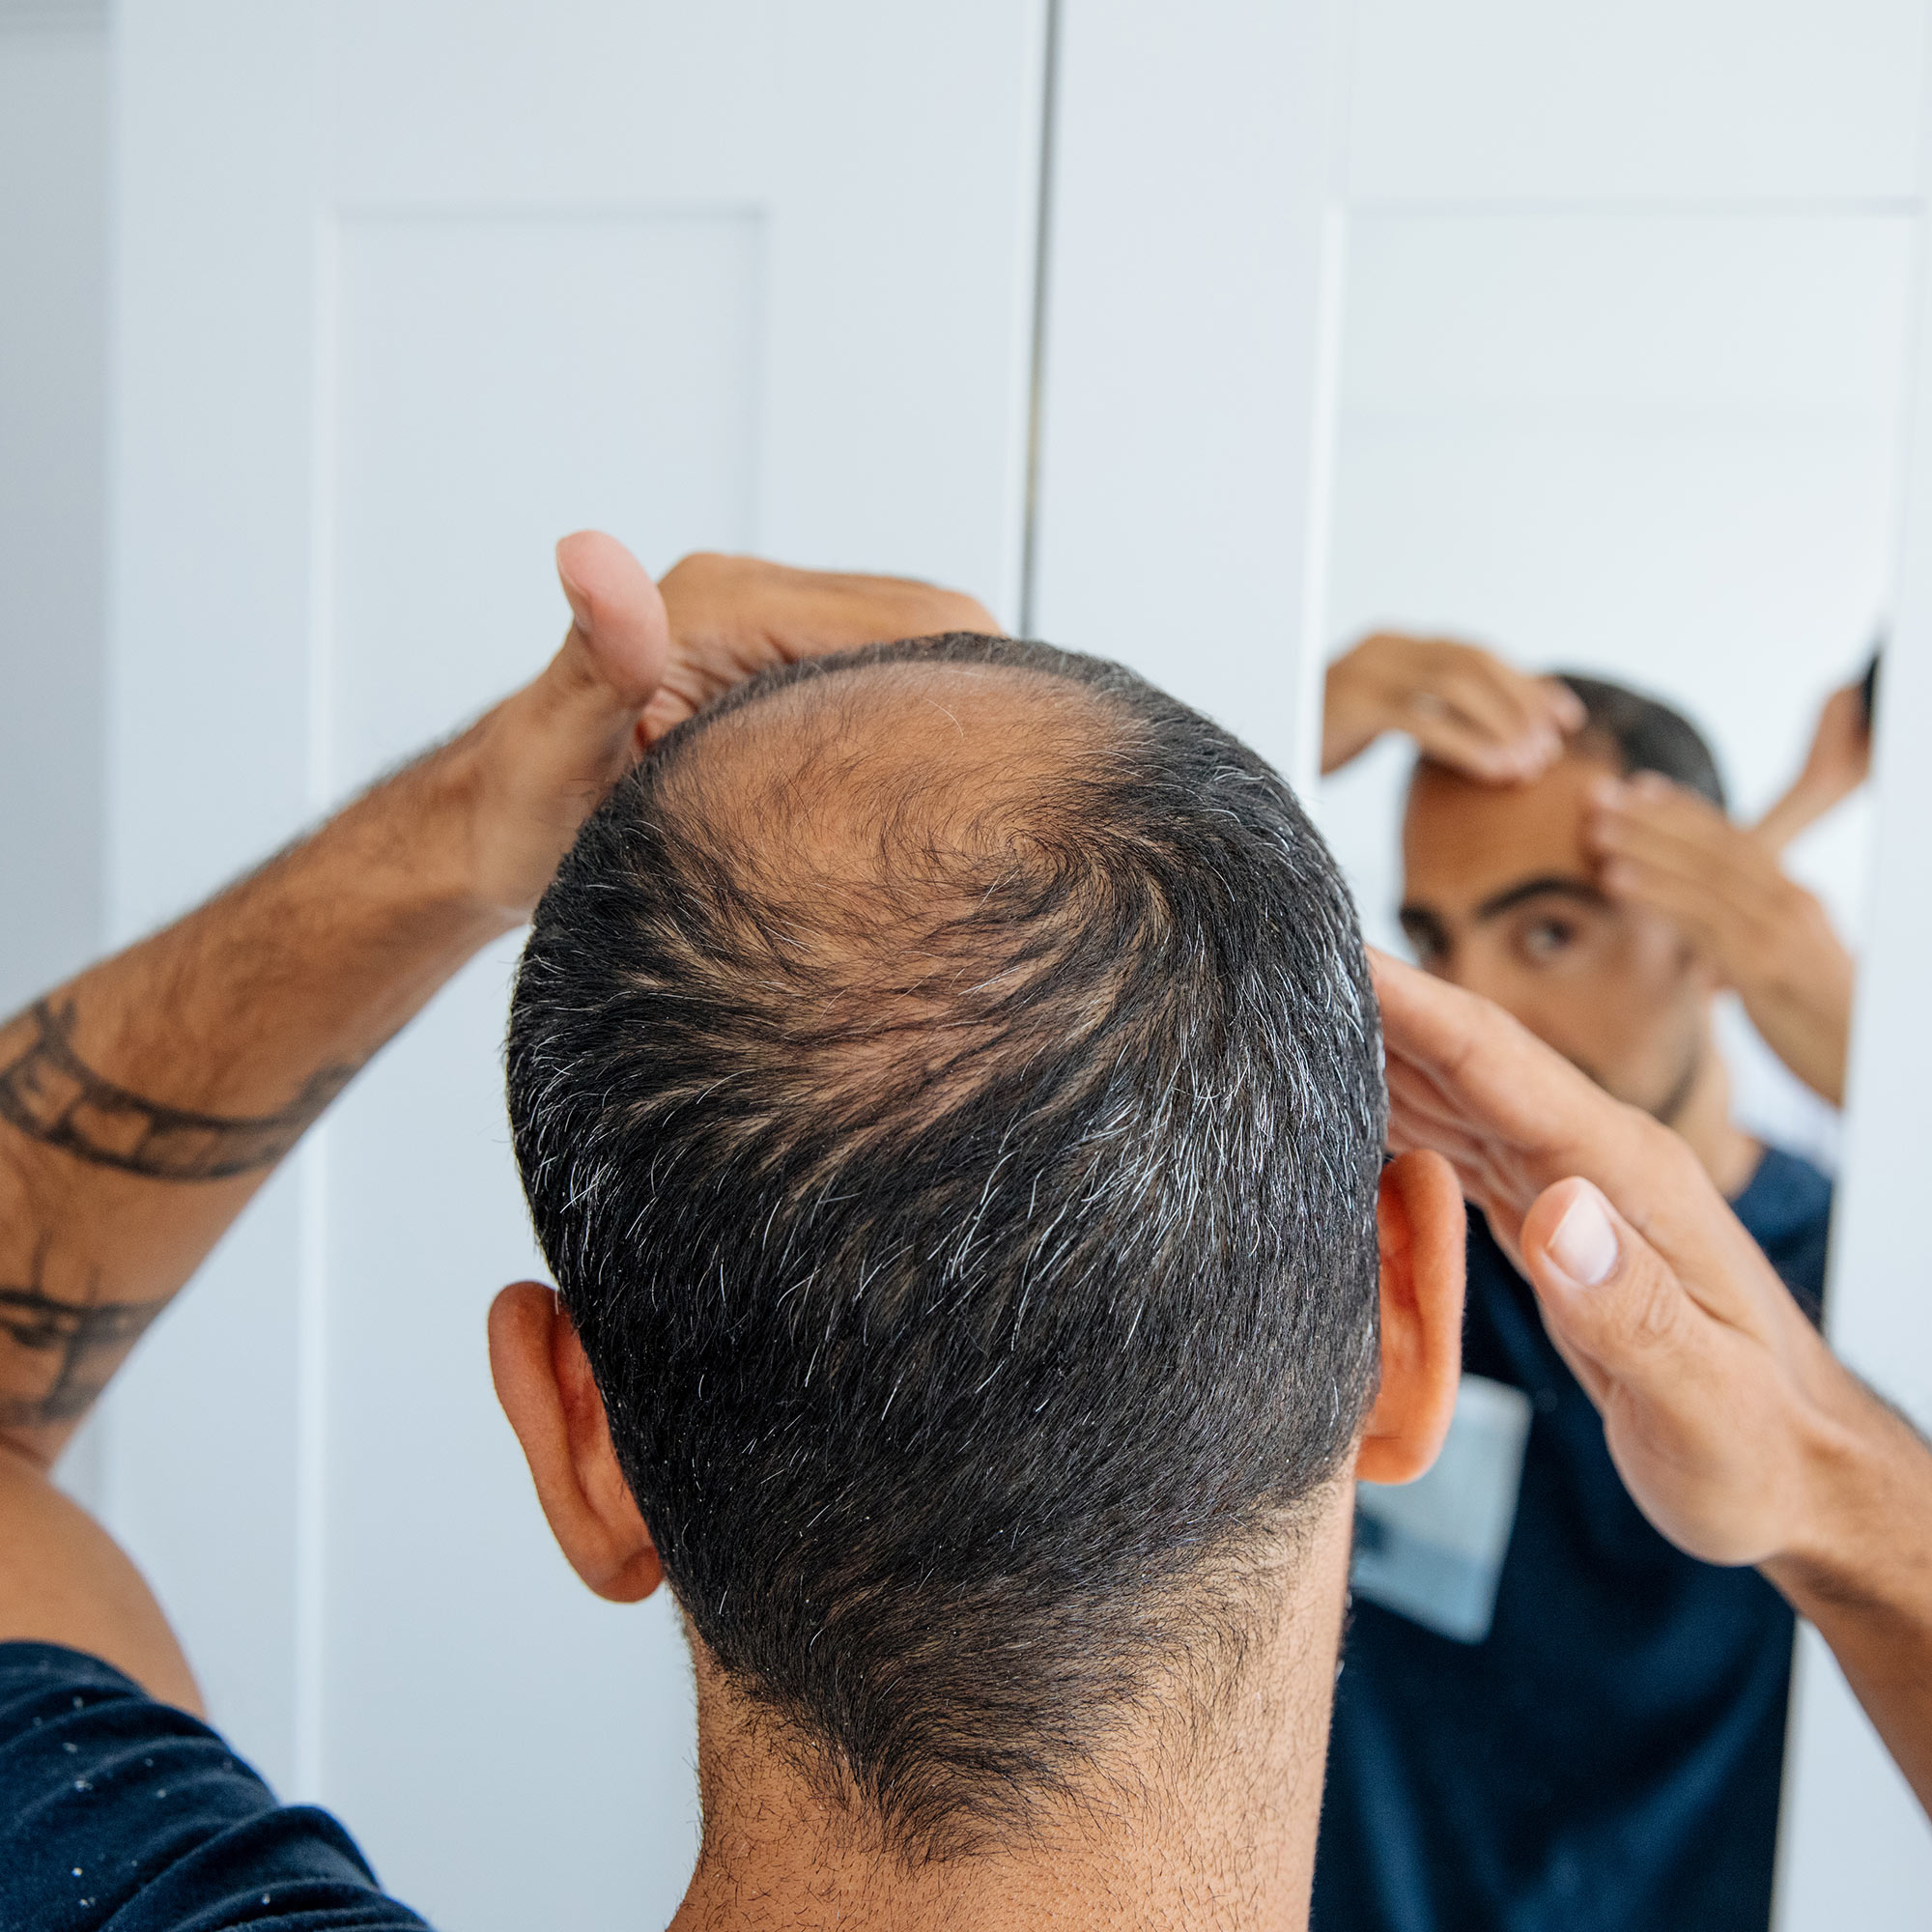 A balding younger man examines his receding hairline in a mirror.